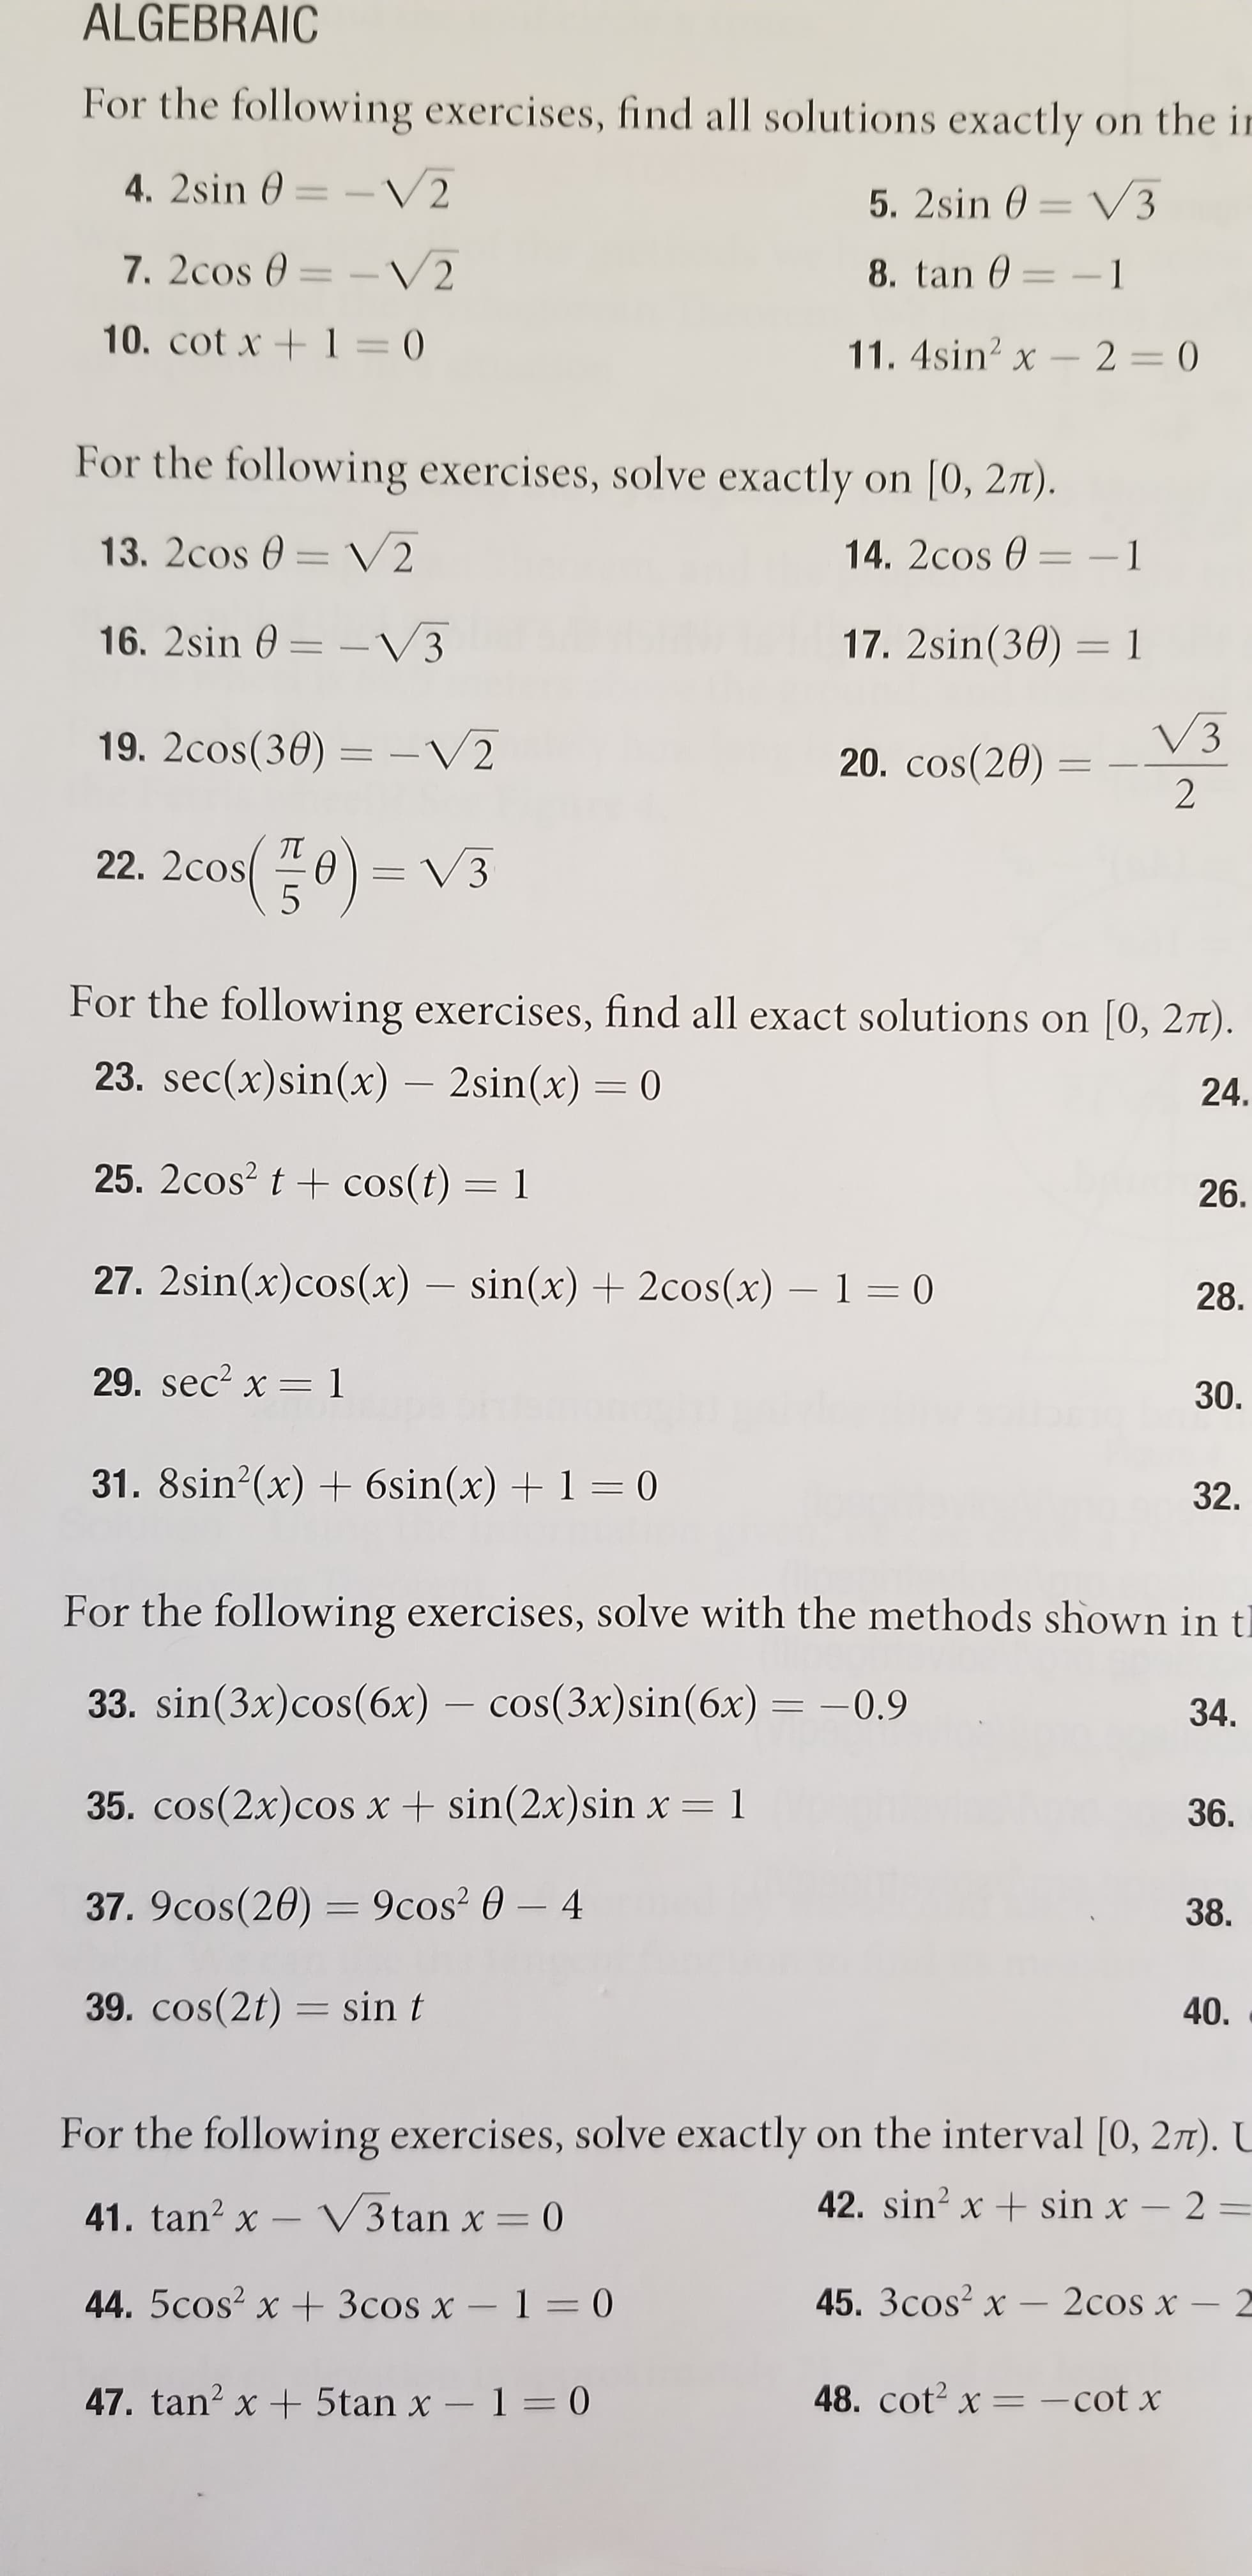 ALGEBRAIC
For the following exercises, find all solutions exactly on the ir
4. 2sin 0 = - V2
5. 2sin 0 = V3
%3D
7. 2cos 0 = –V2
8. tan 0 = -1
%D
10. cot x +1 = 0
11. 4sin? x - 2 = 0
For the following exercises, solve exactly on [0, 27).
13. 2cos 0 = V2
14. 2cos 0 = -1
16. 2sin 0 = -V3
17. 2sin(30) = 1
V3
19. 2cos(30) = -V2
20. cos(20) =
%3D
22. 2cos(플e)= V3
For the following exercises, find all exact solutions on [0, 2T).
23. sec(x)sin(x) – 2sin(x) = 0
24.
25. 2cos? t + cos(t) = 1
26.
27. 2sin(x)cos(x) – sin(x) + 2cos(x) – 1 = 0
28.
29. sec? x =
=D1
30.
31. 8sin?(x) + 6sin(x) + 1 = 0
32.
For the following exercises, solve with the methods shown in t)
34.
33. sin(3x)cos(6x) – cos(3x)sin(6x) = -0.9
36.
35. cos(2x)cos x+ sin(2x)sin x = 1
38.
37. 9cos(20) = 9cos? 0 – 4
40.
39. cos(2t) = sin t
COS
%3D
For the following exercises, solve exactly on the interval [0, 27T). U
42. sin? x + sin x - 2
41. tan? x – V3 tan x = 0
45. 3cos? x - 2cos x – 2
44. 5cos? x + 3cos x - 1 = 0
48. cot? x = -cot x
%3D
47. tan? x + 5tan x - 1= 0
